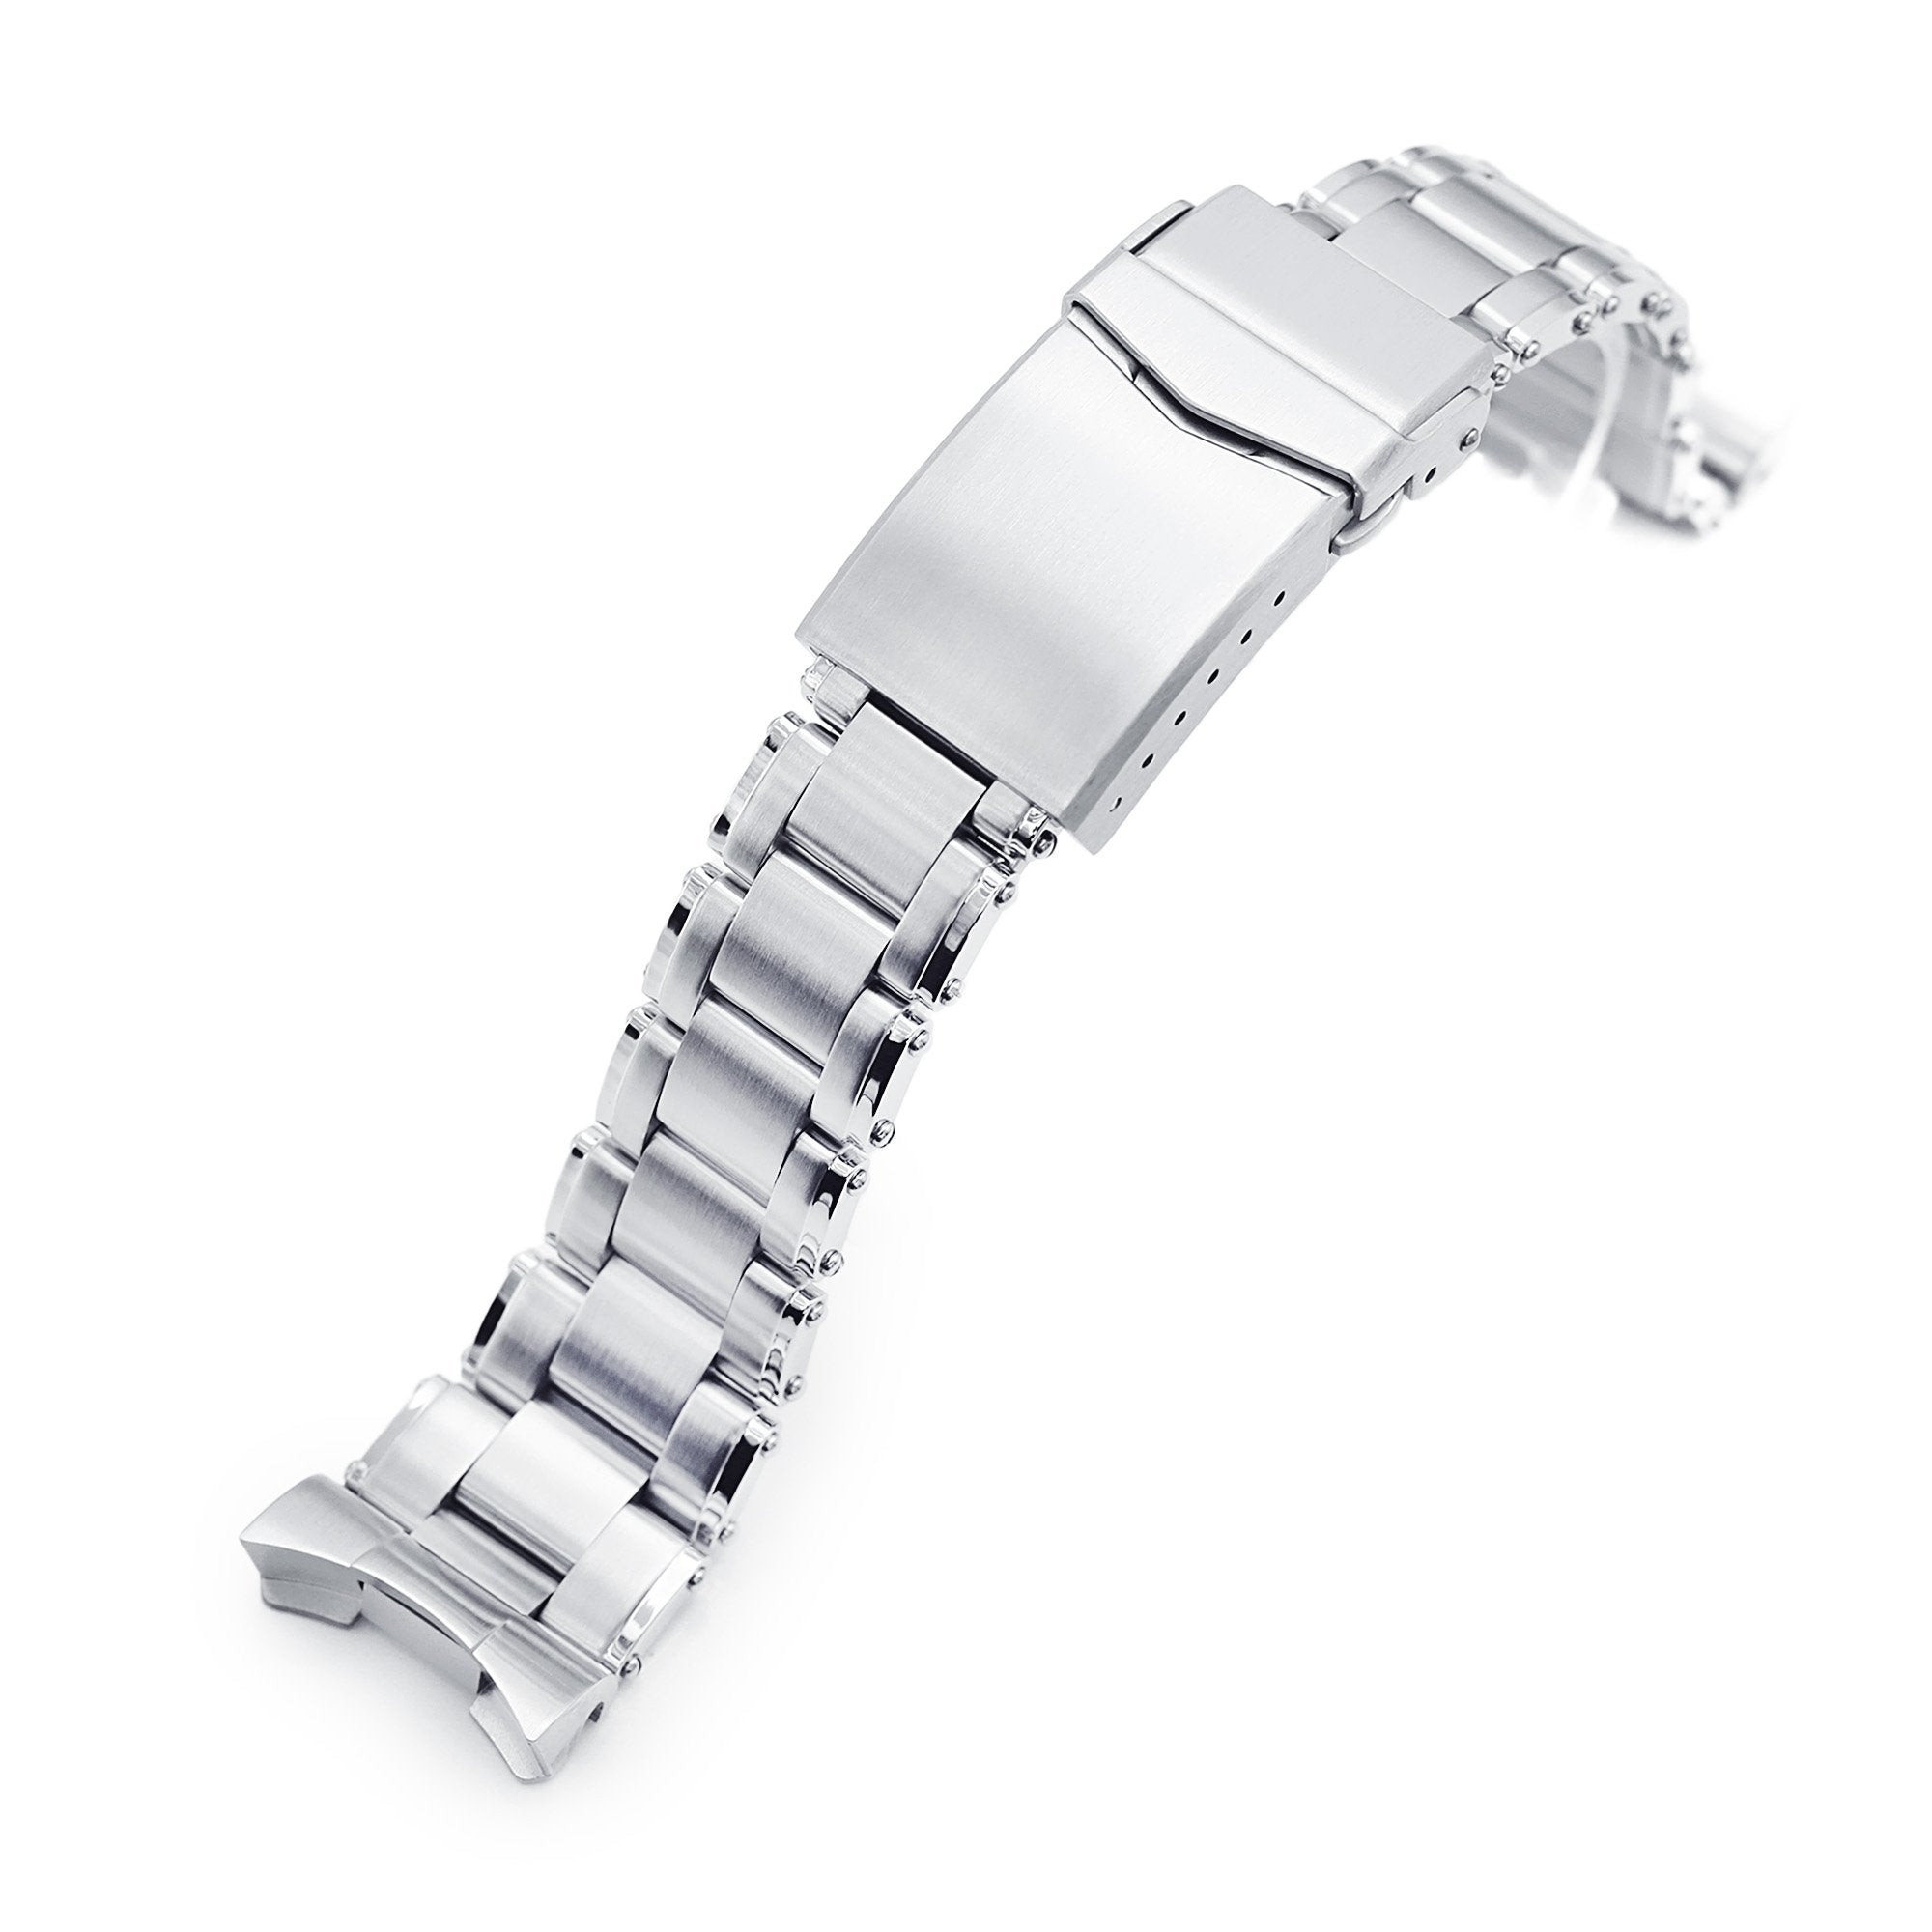 22mm Metabind 316L Stainless Steel Watch Bracelet for Seiko SKX007 Brushed V-Clasp Strapcode Watch Bands